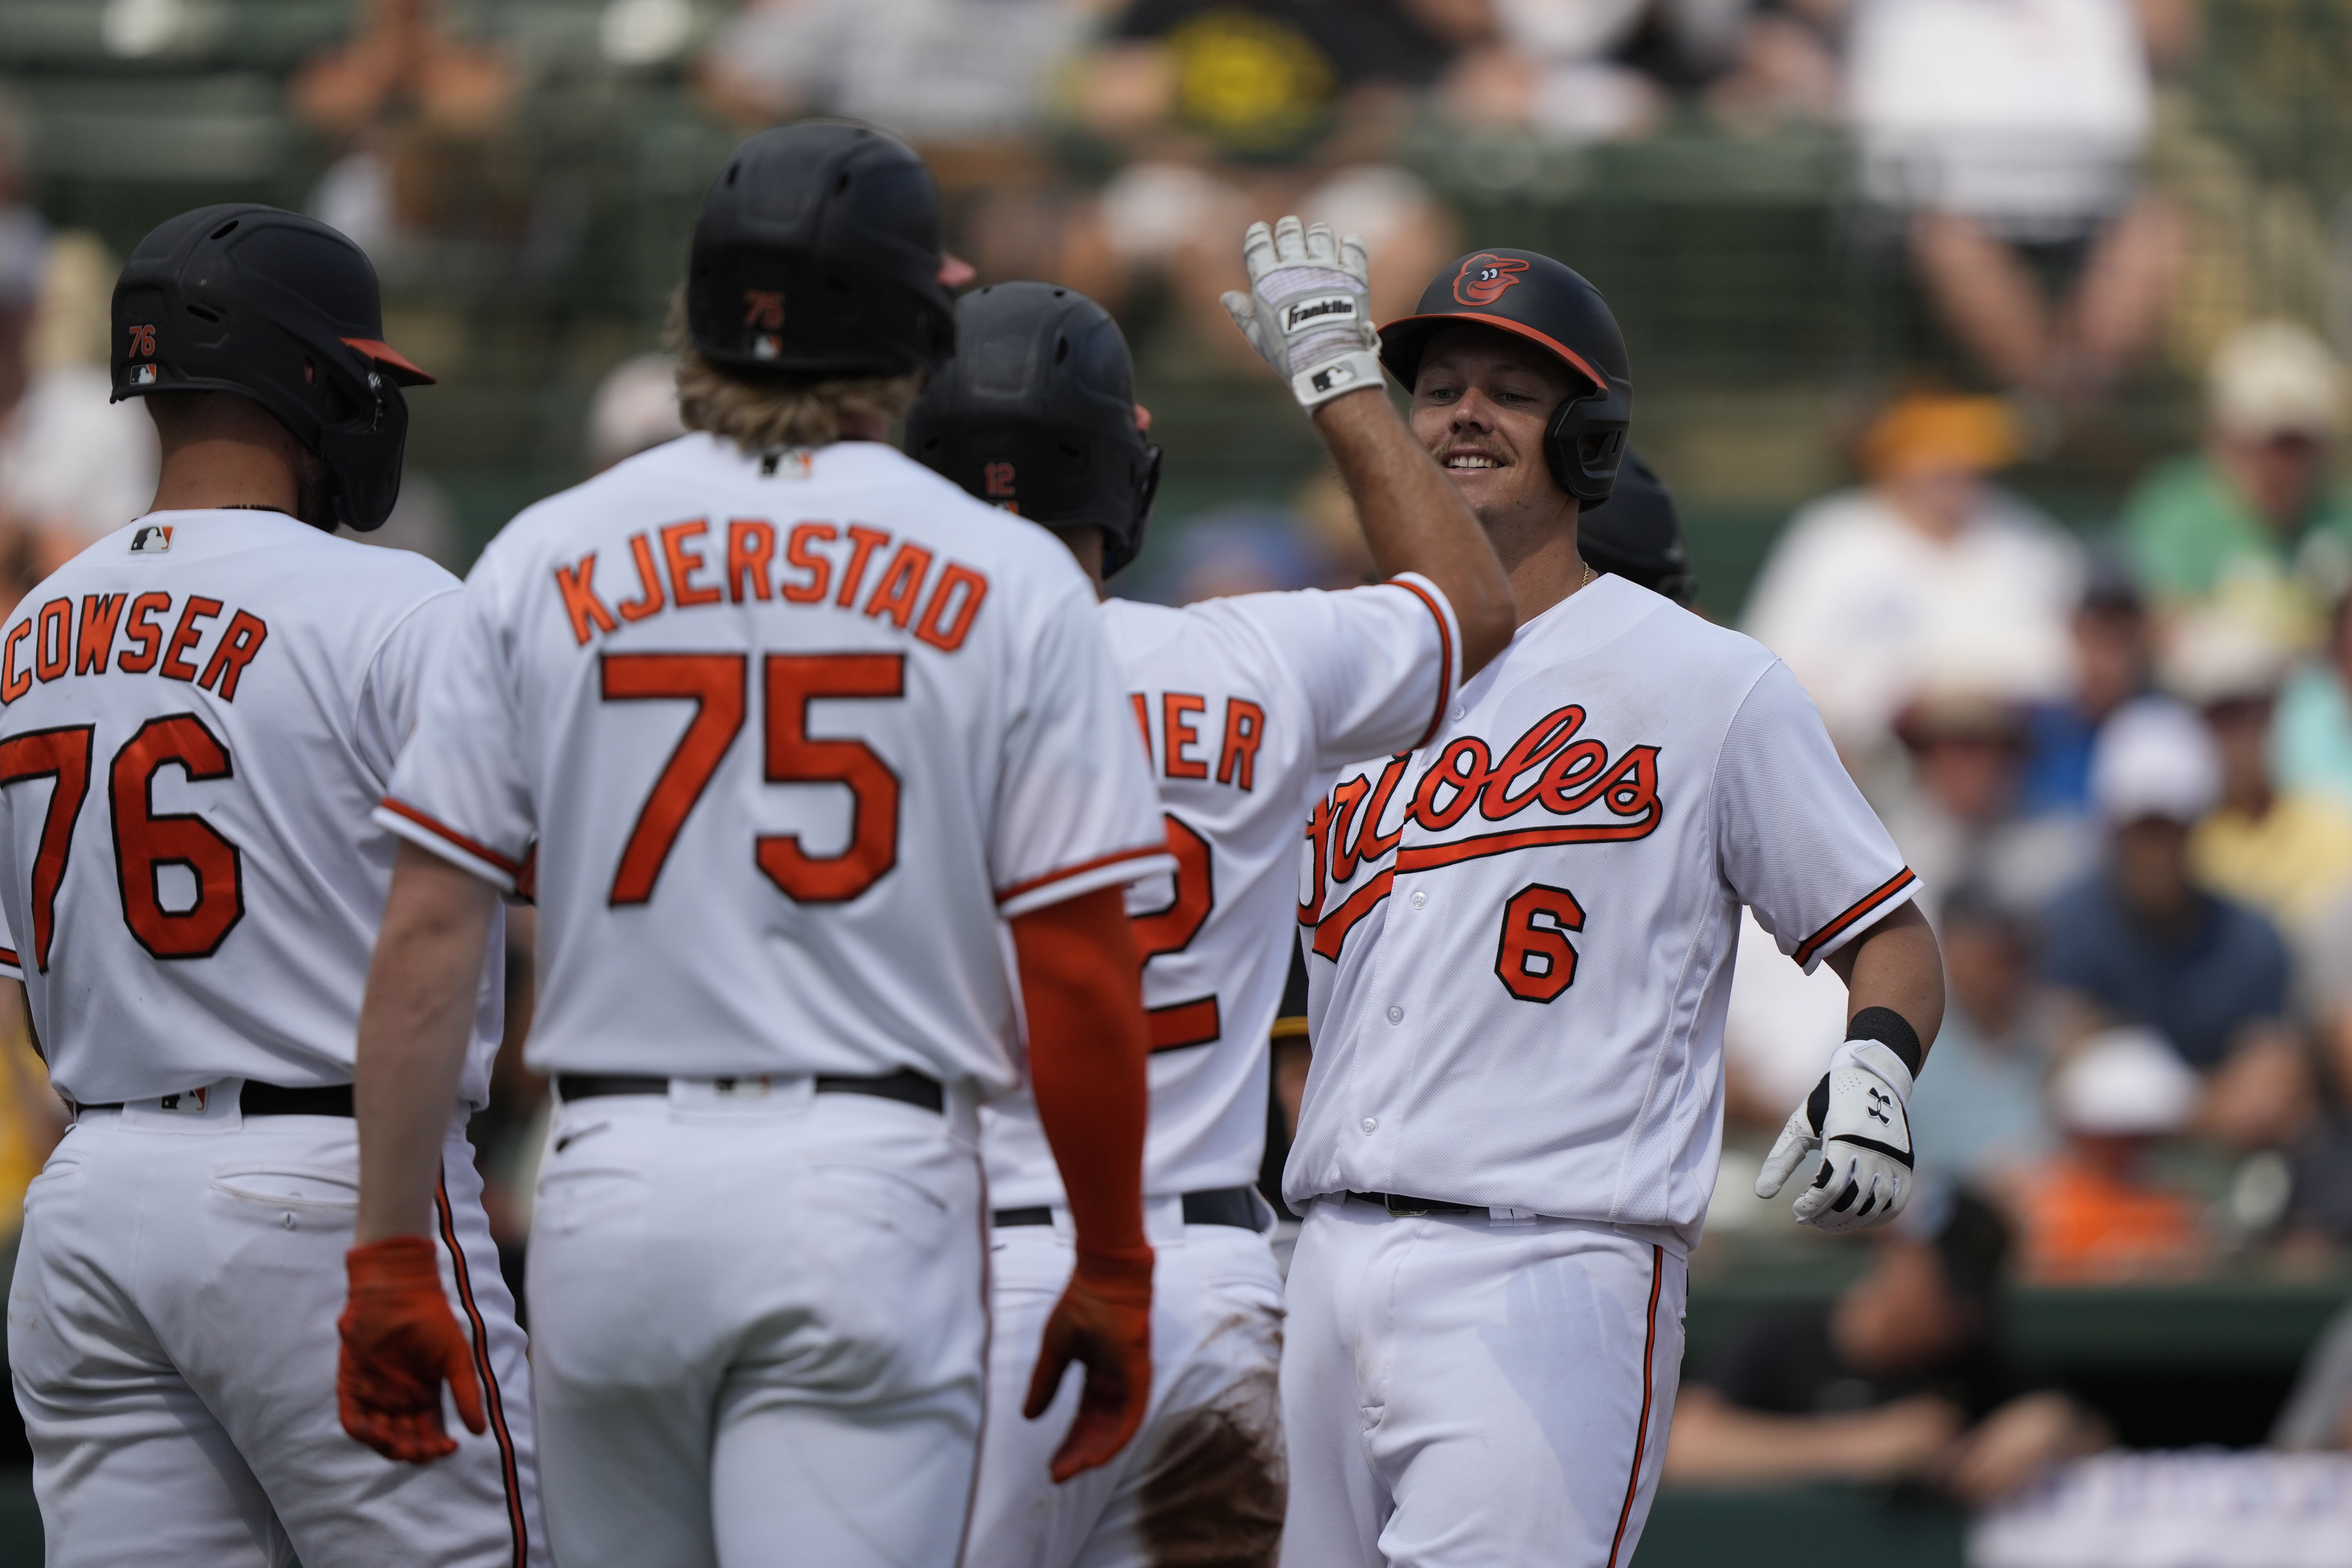 City Connect debut brought no luck for the Orioles